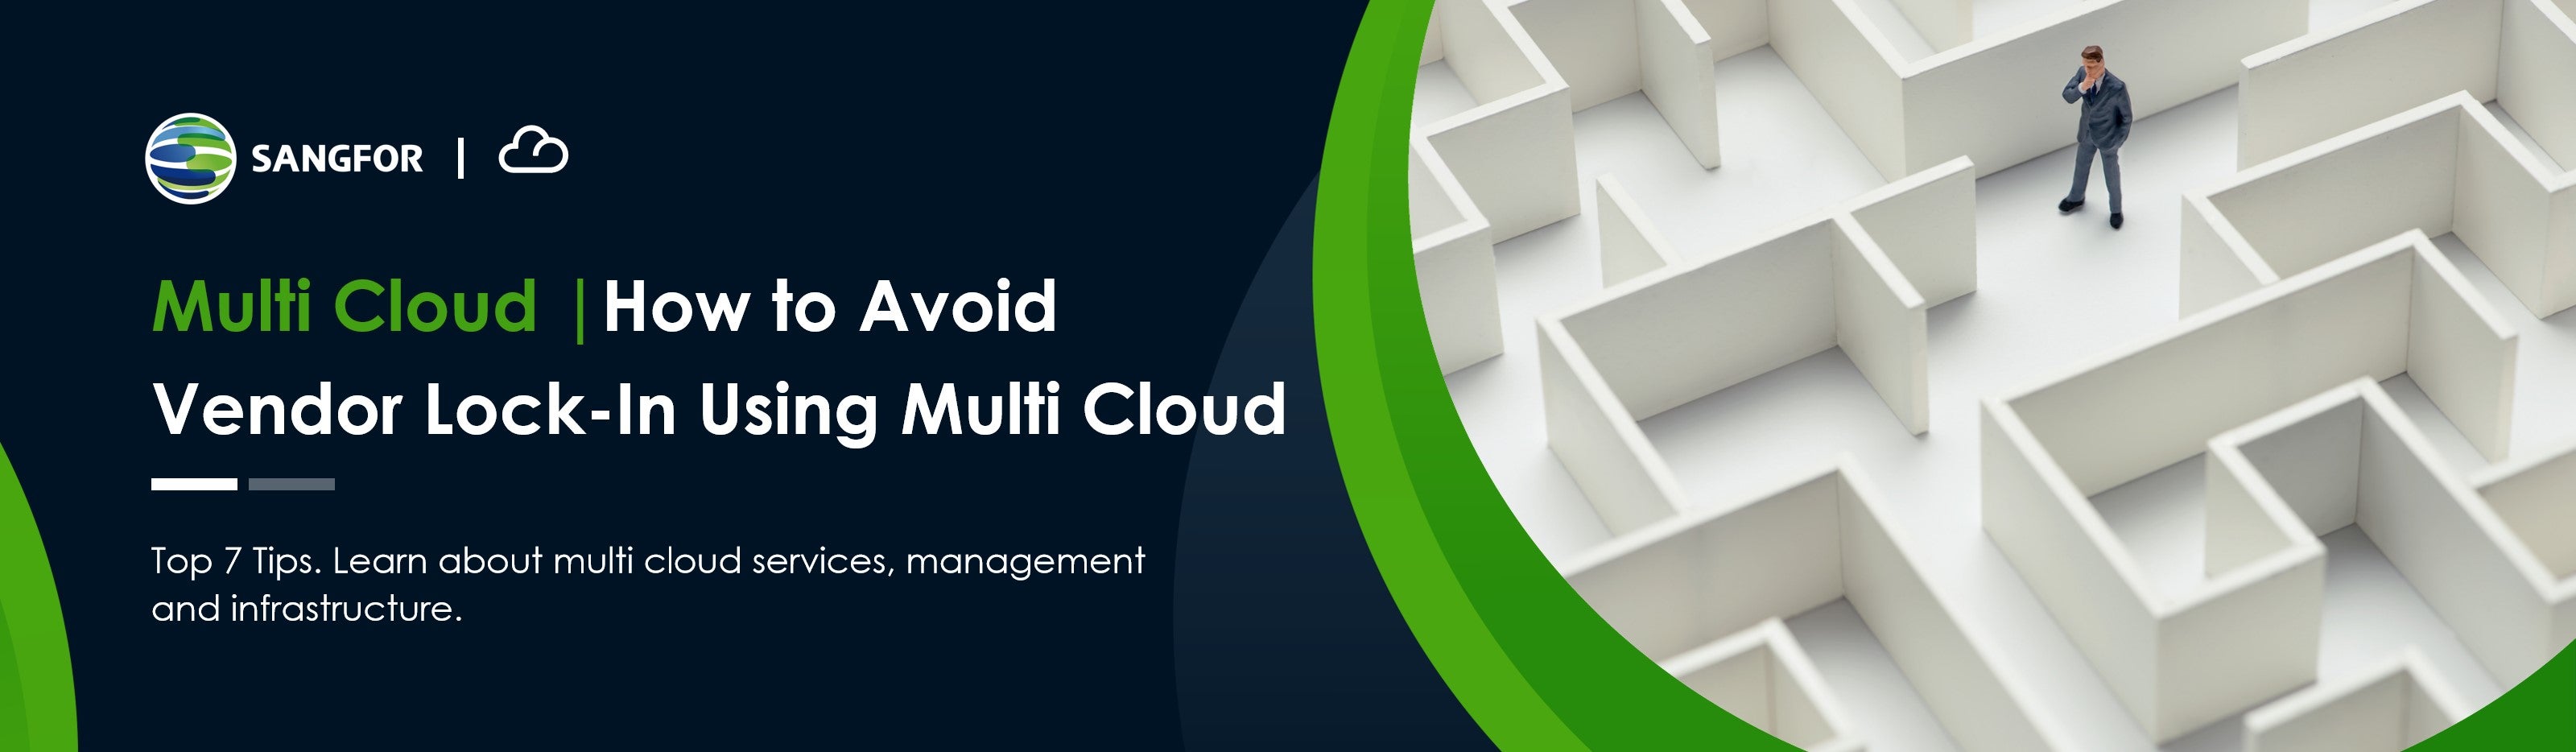 Top 7 Tips on How to Avoid Vendor Lock-In using Multi Cloud Article